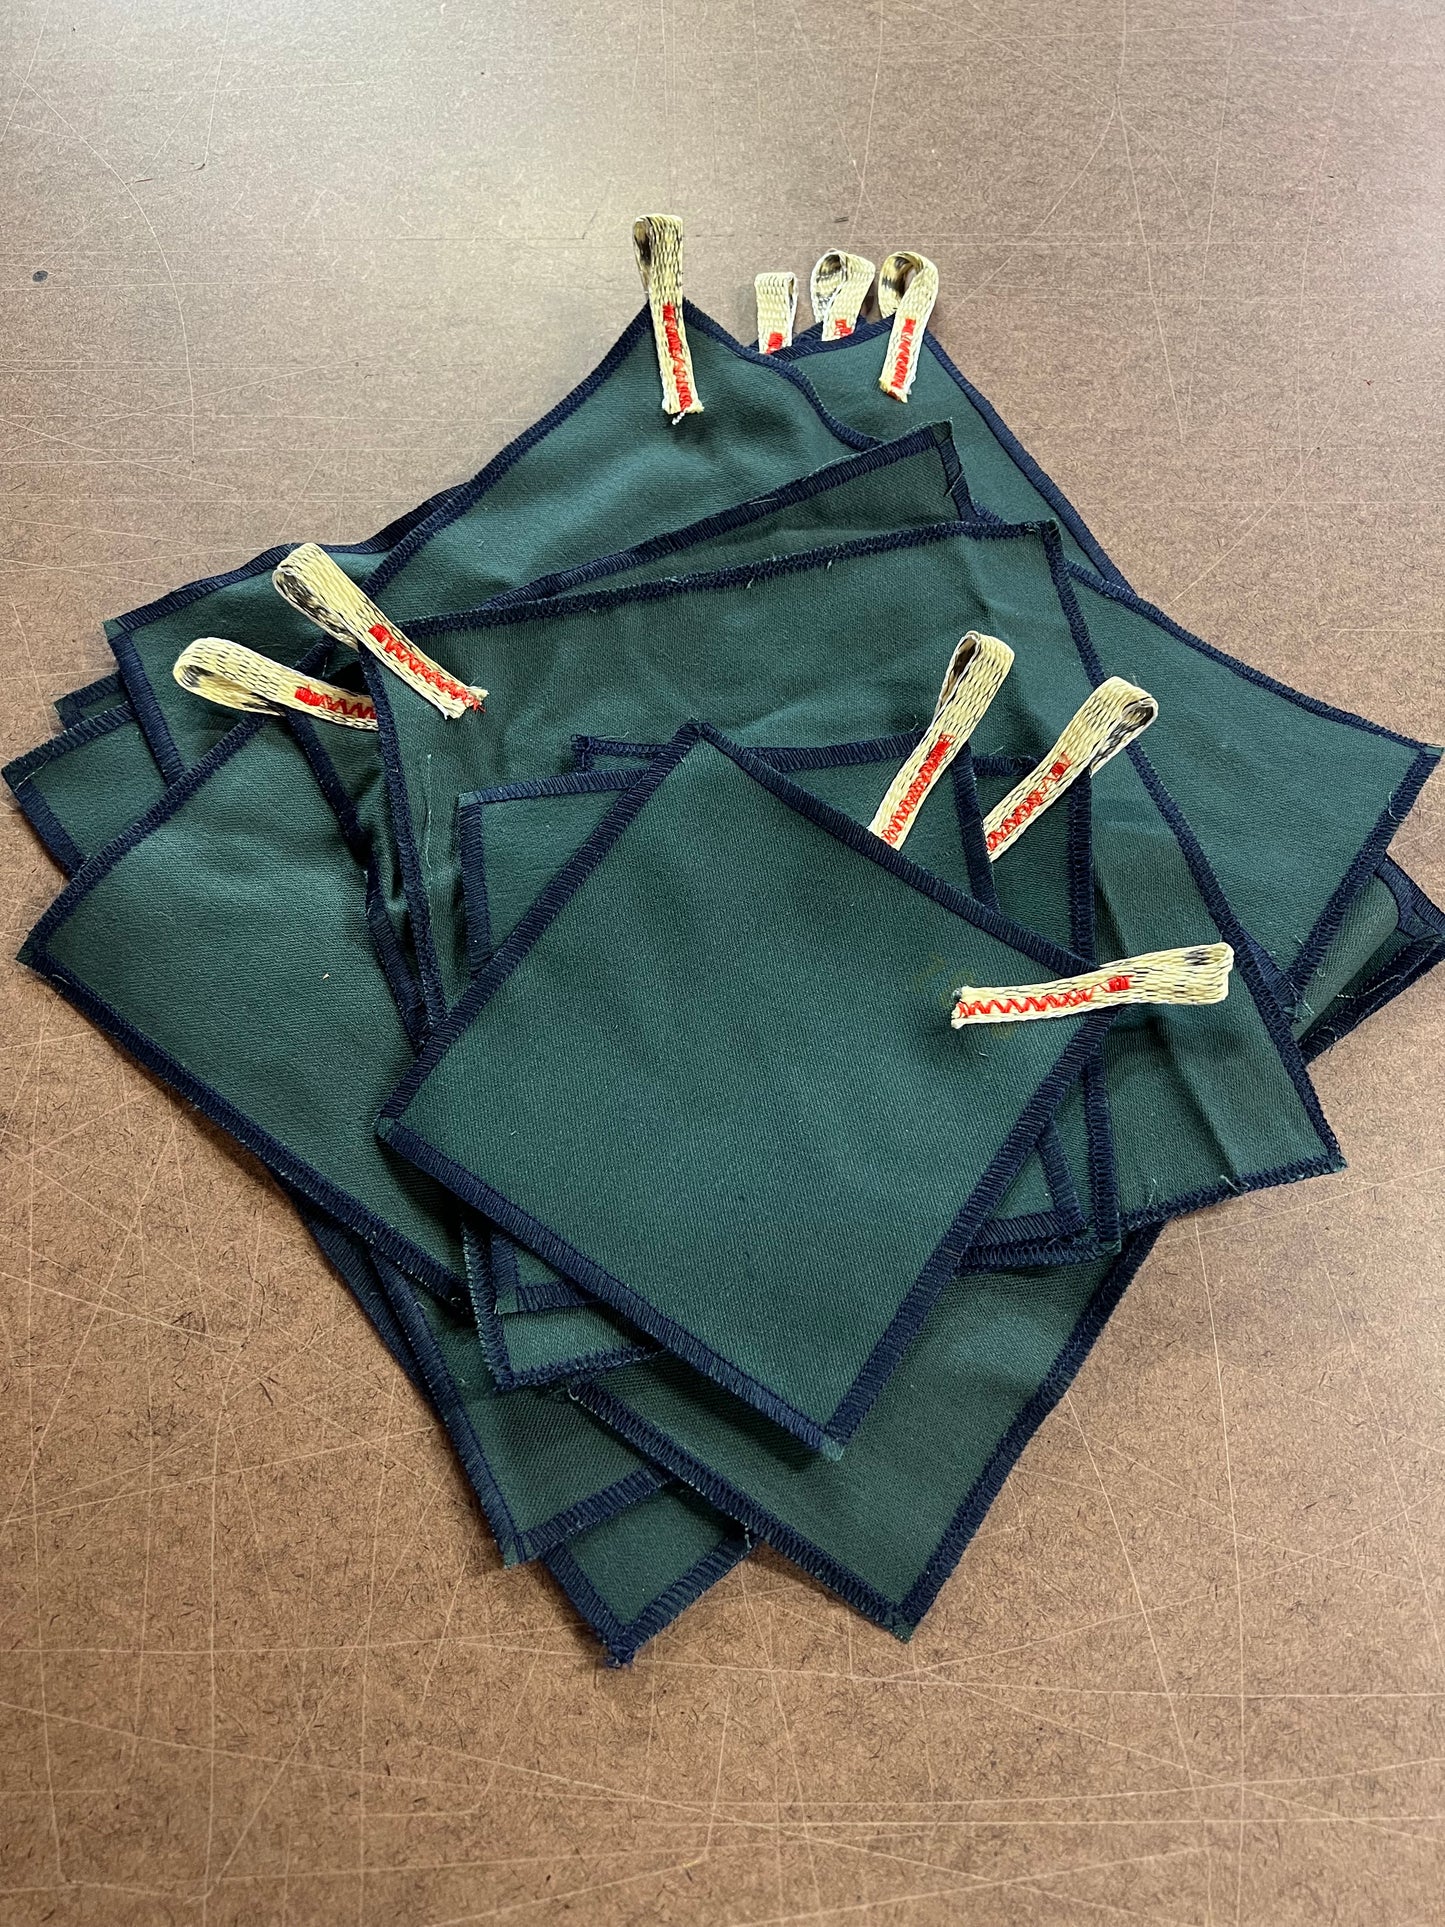 6x6 Nomex Fire Blanket